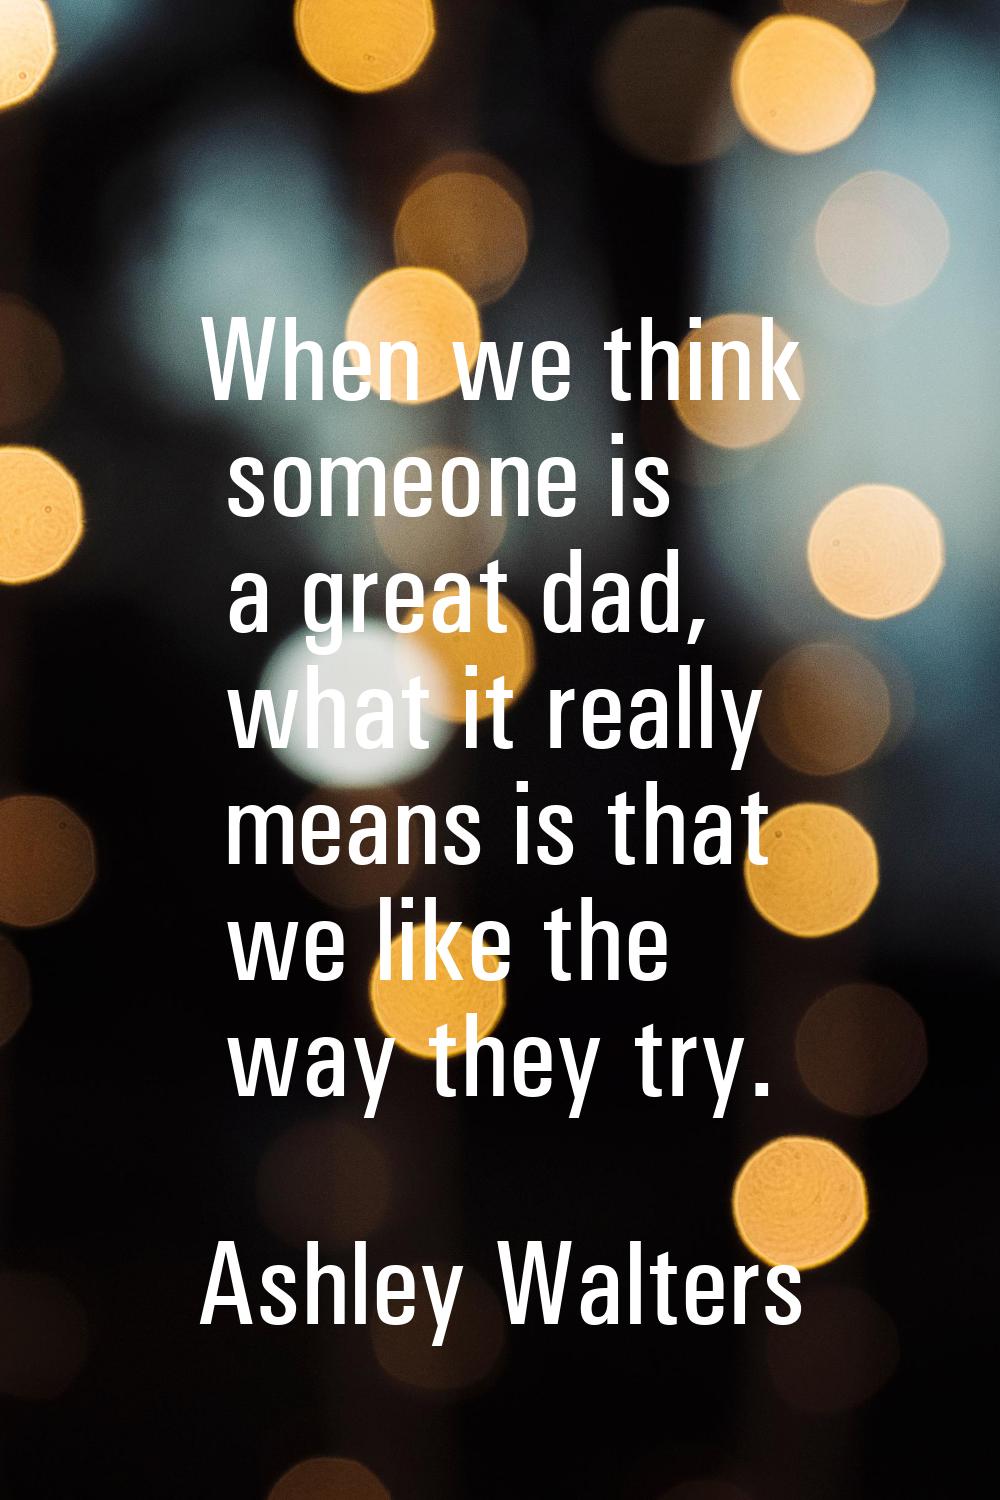 When we think someone is a great dad, what it really means is that we like the way they try.